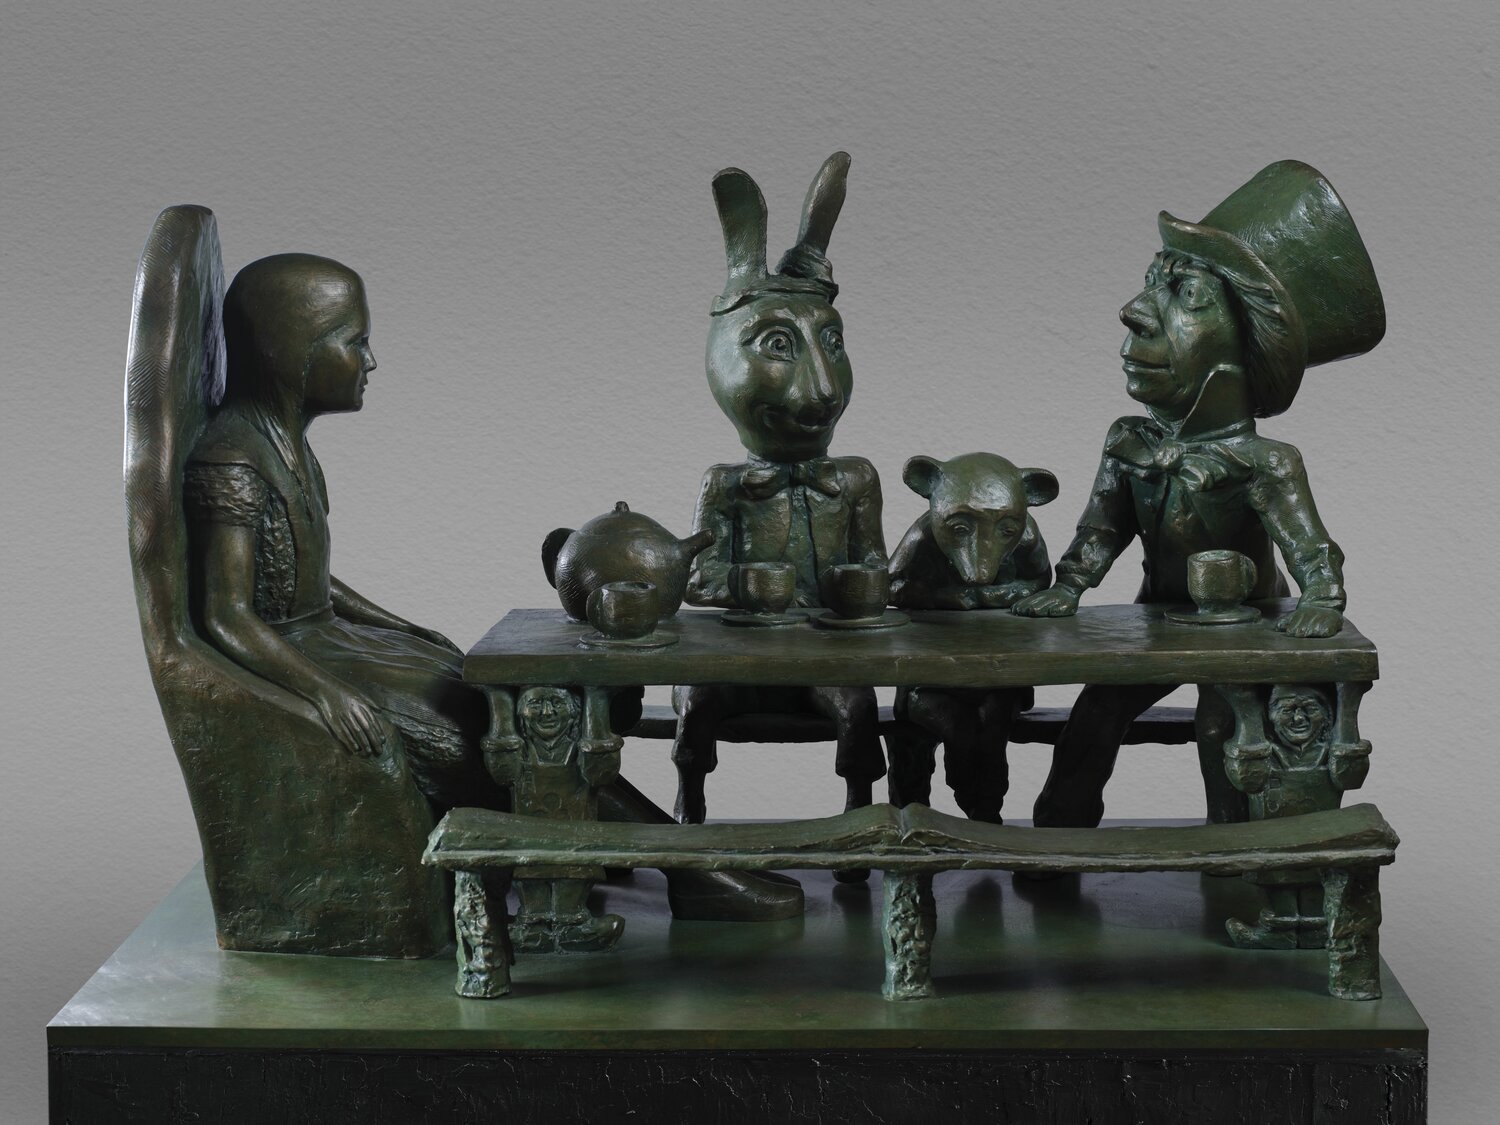 “Tea Party” (maquette), 1996-97, in bronze, edition 1/9, is by George R. Anthonisen (b. 1936).